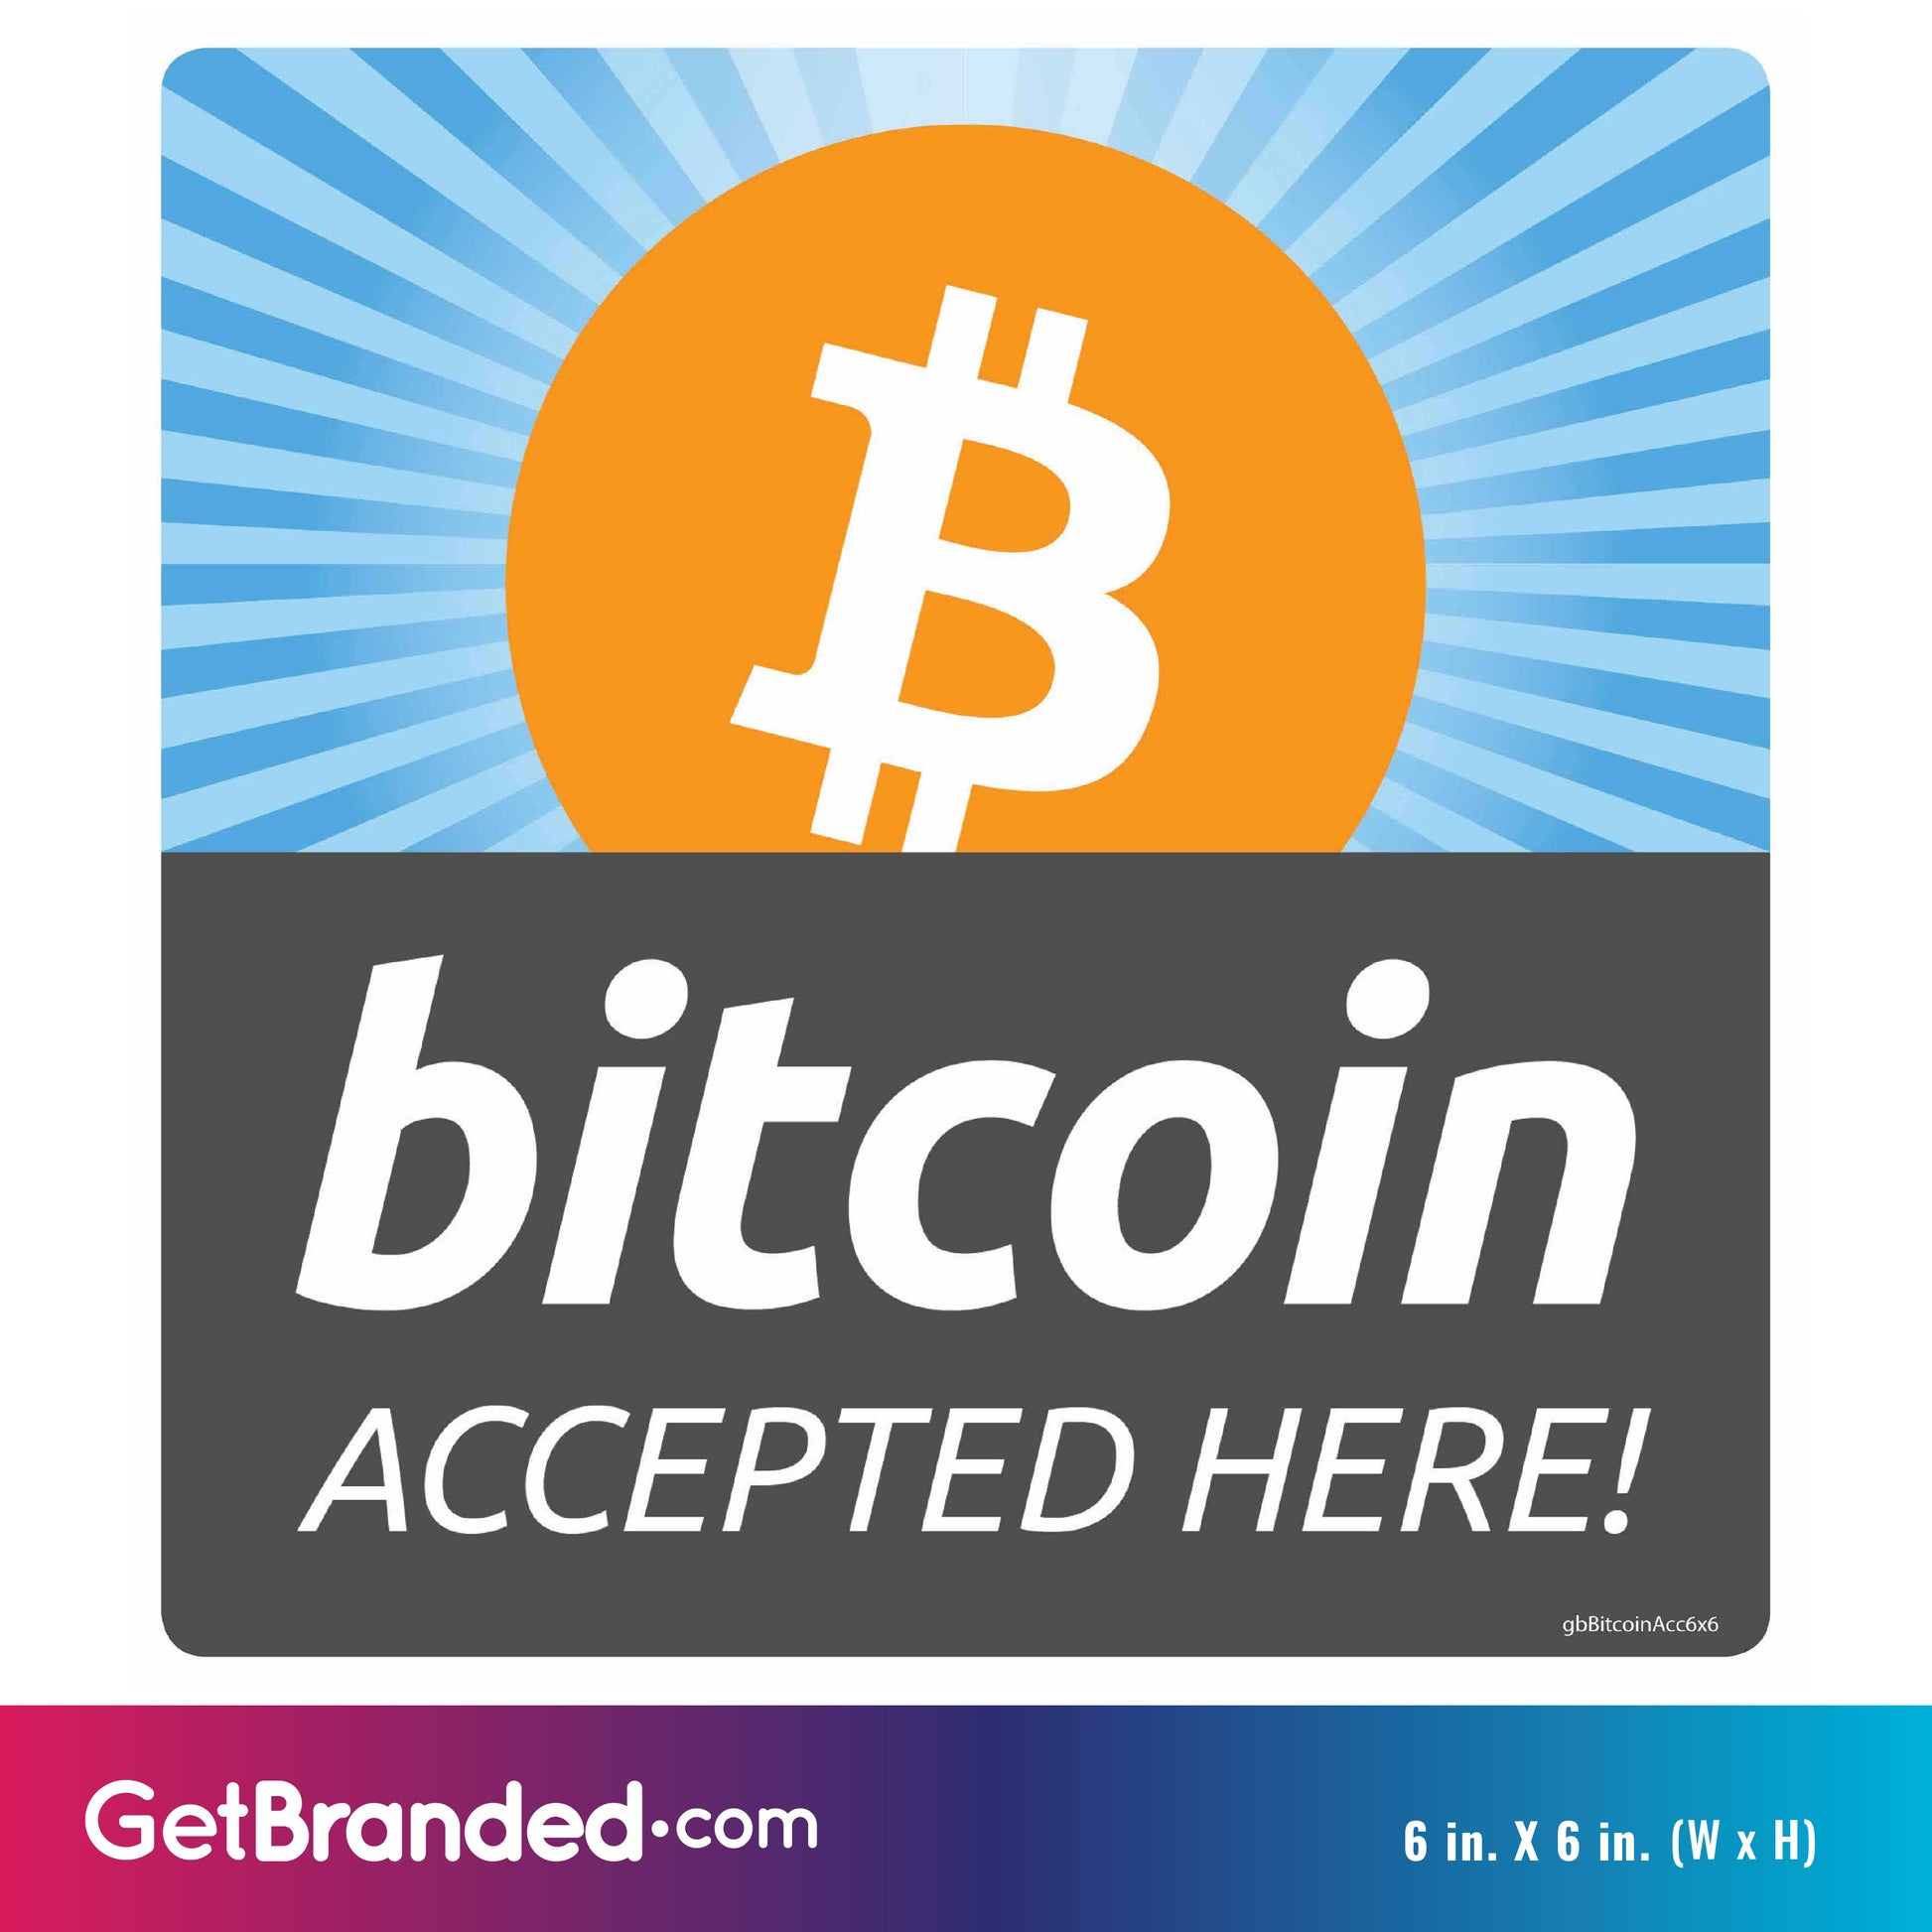 Bitcoin Accepted Here Decal size guide. 6 inches by 6 inches in size.